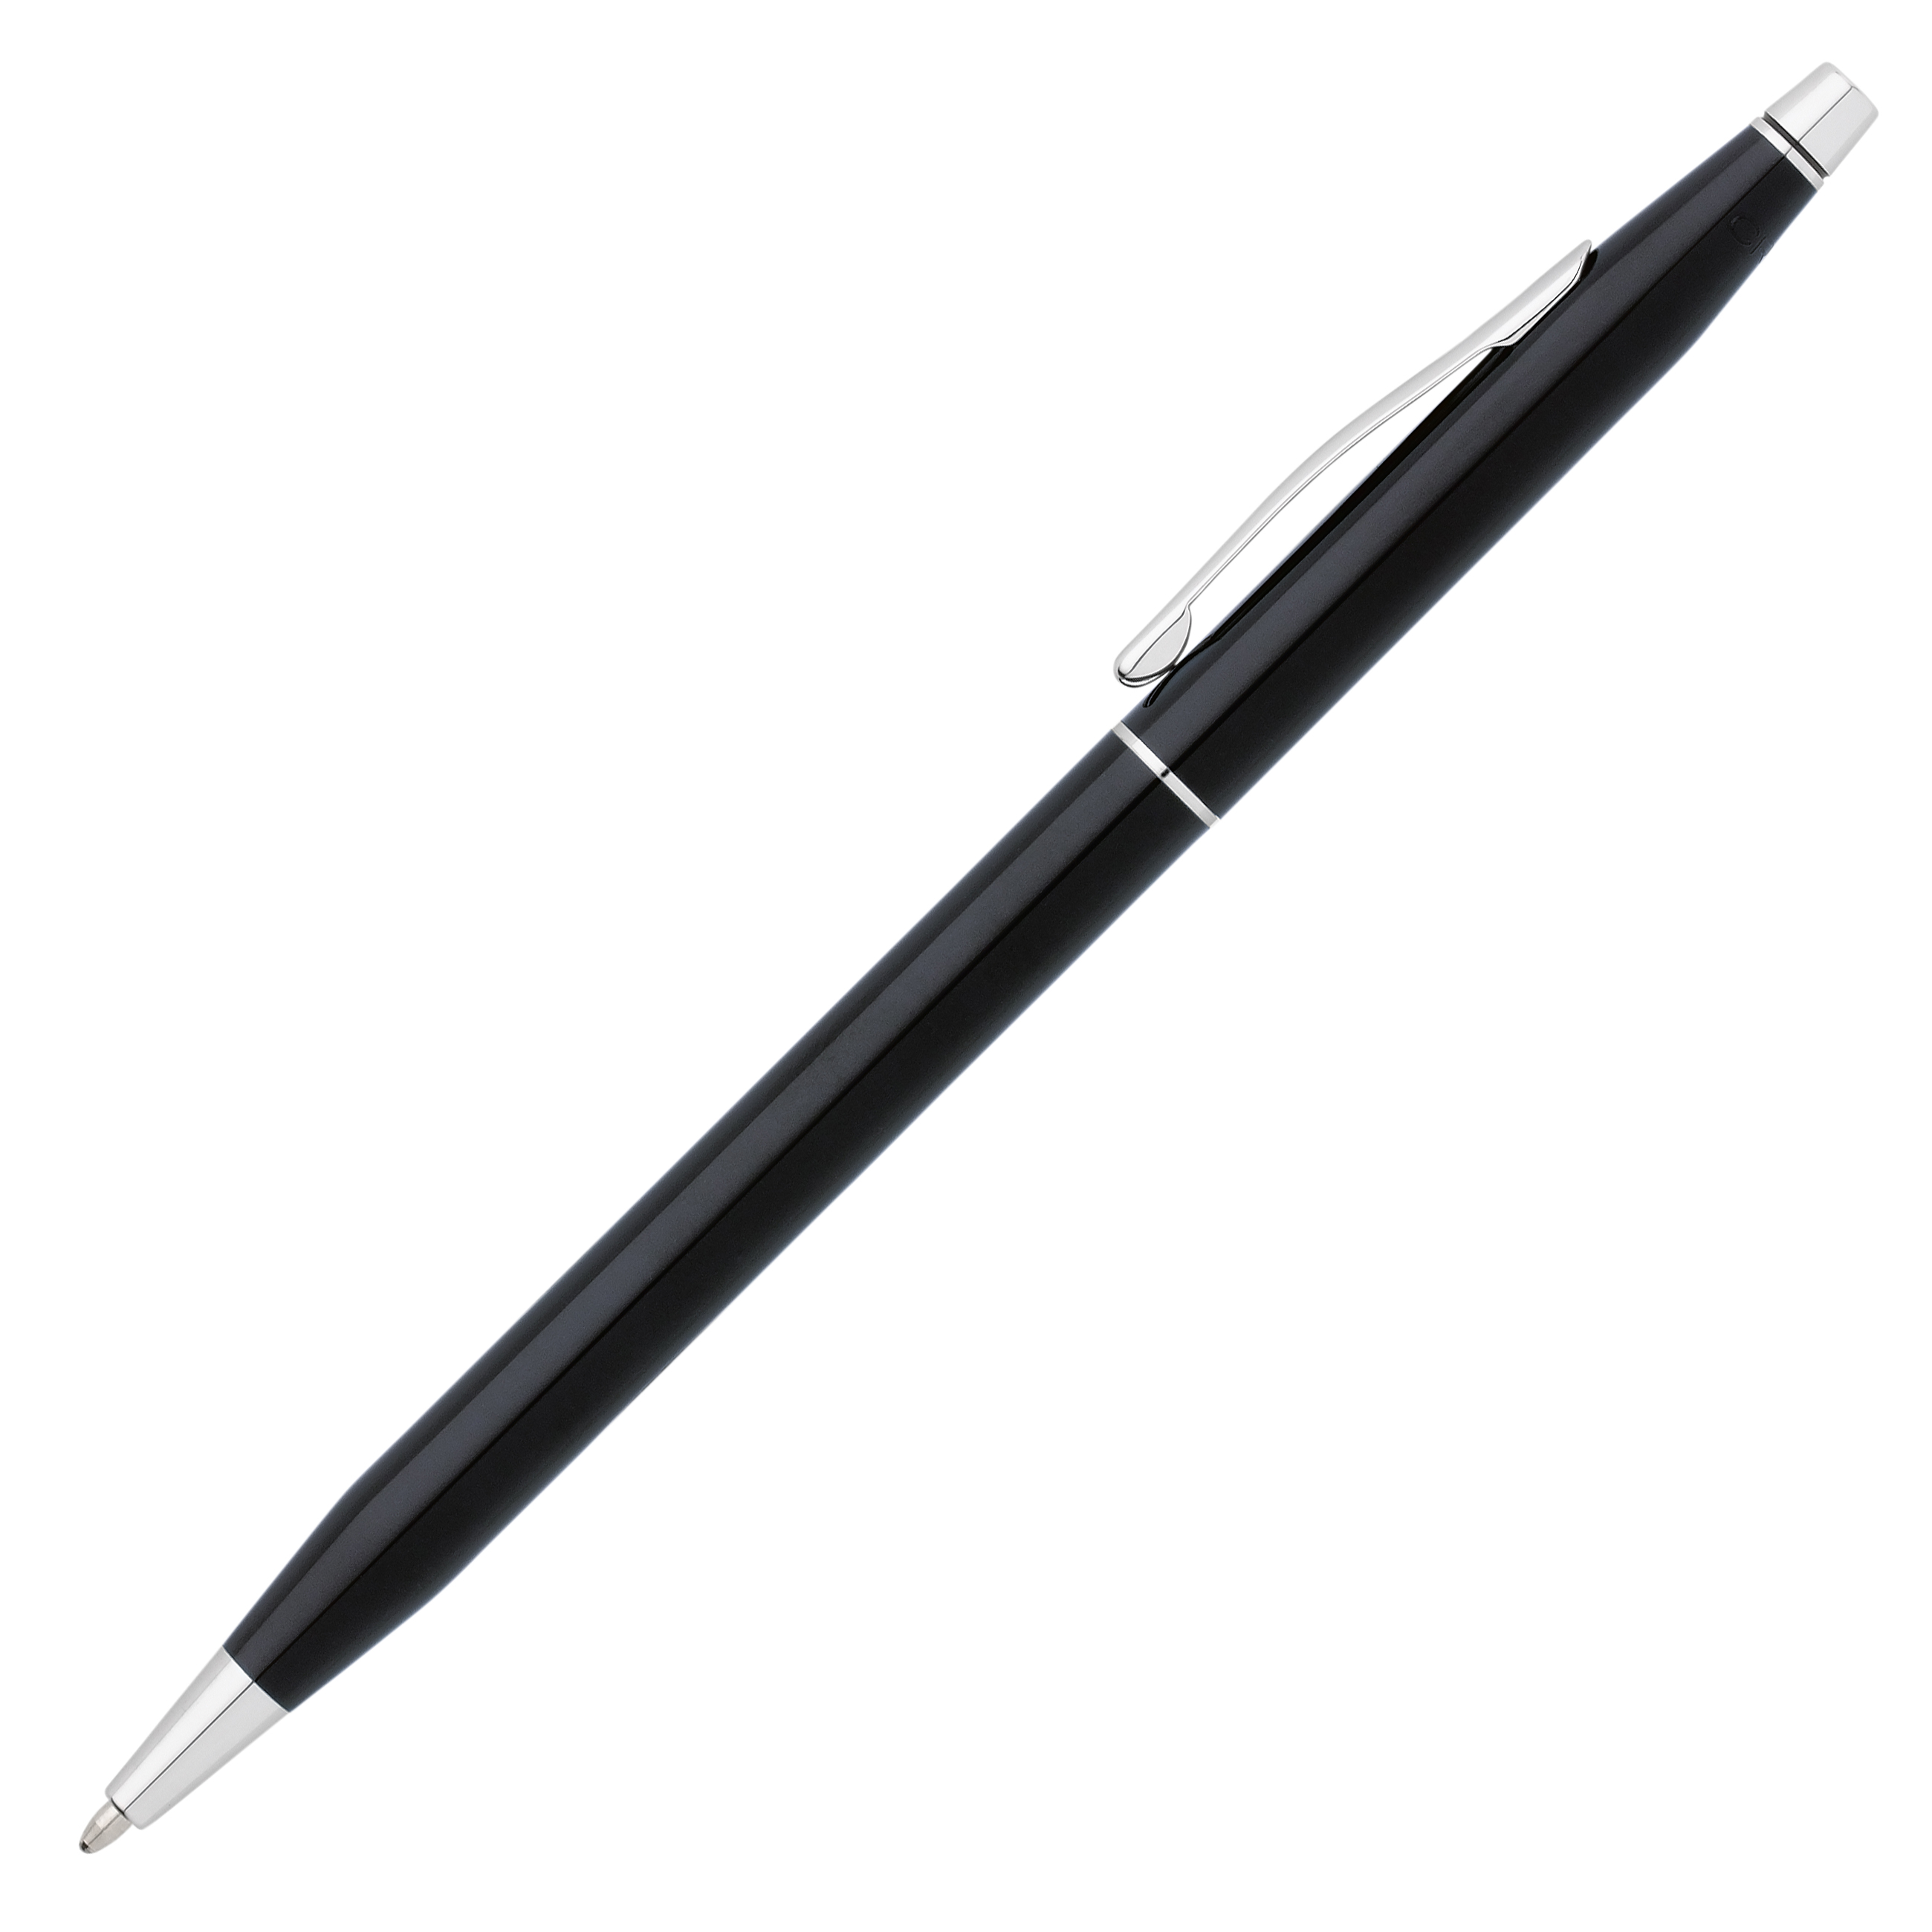 AT0082-77 Classic Black Lacquer Cross Ballpoint Pen Engraved